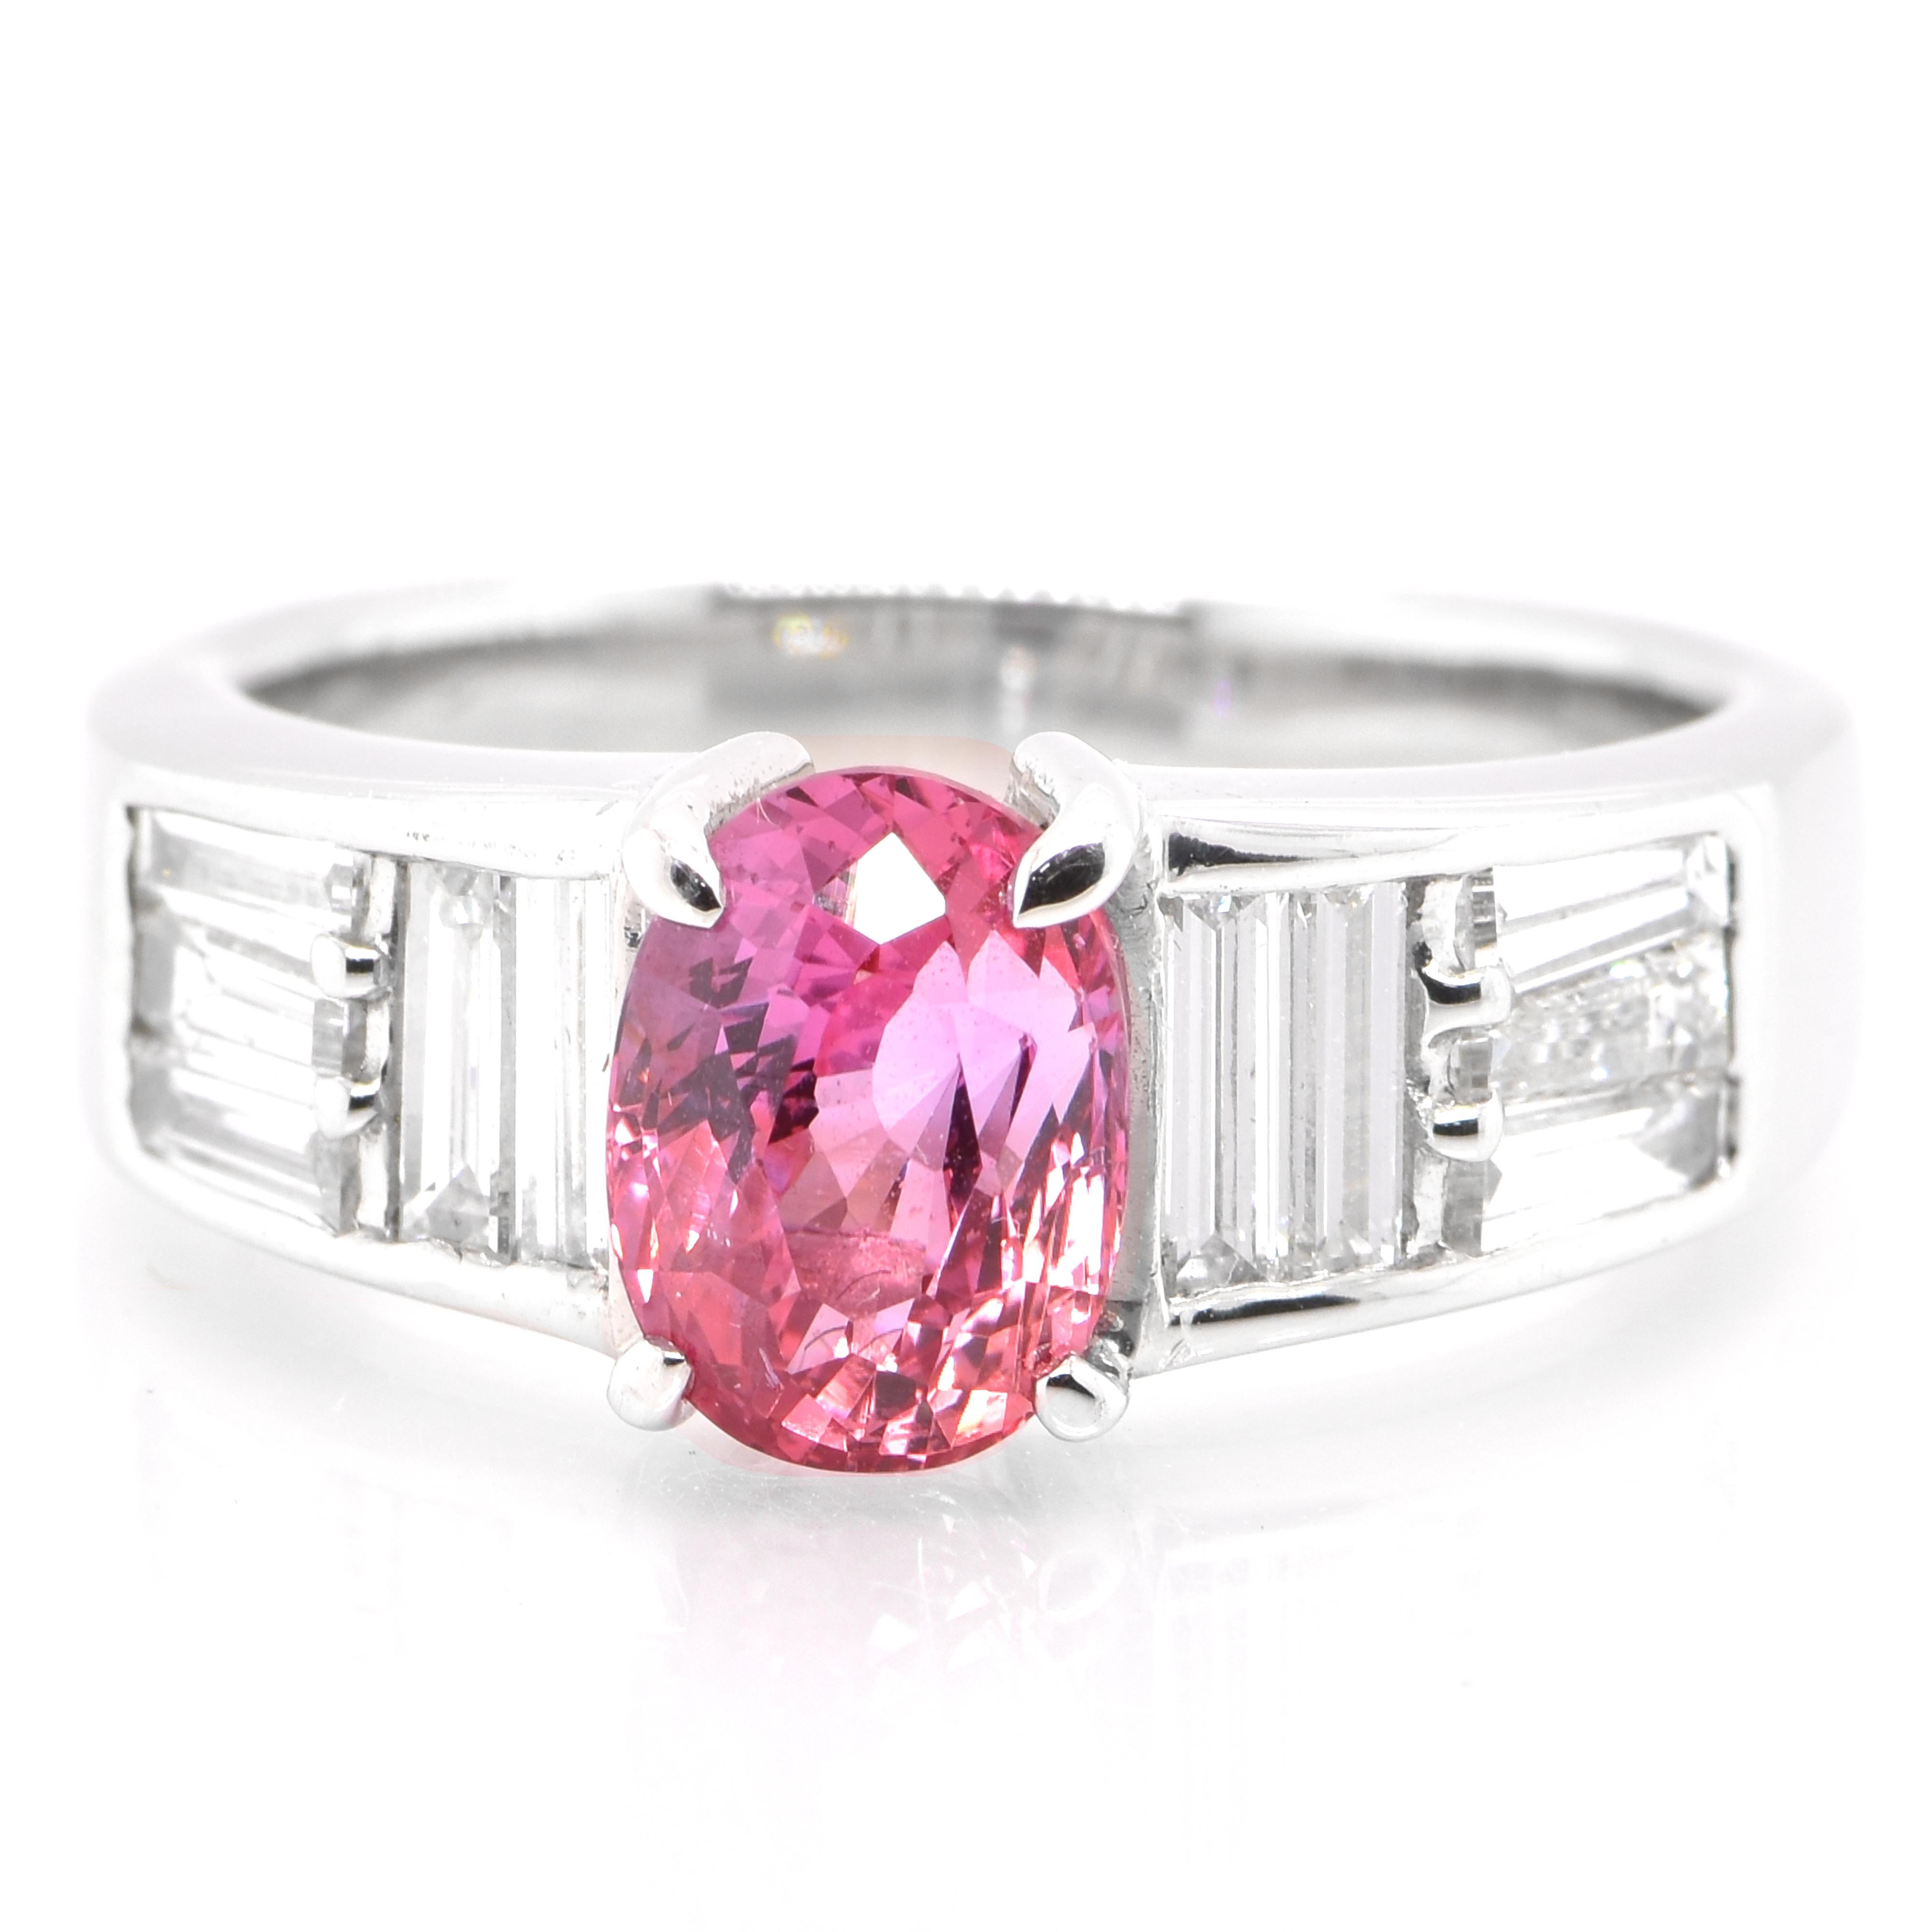 An elegant ring with a 2.15 Carat, Natural Pink Sapphire and 0.84 Carats of Diamond Accents set in Platinum. Sapphires have extraordinary durability - they excel in hardness as well as toughness and durability making them very popular in jewelry.